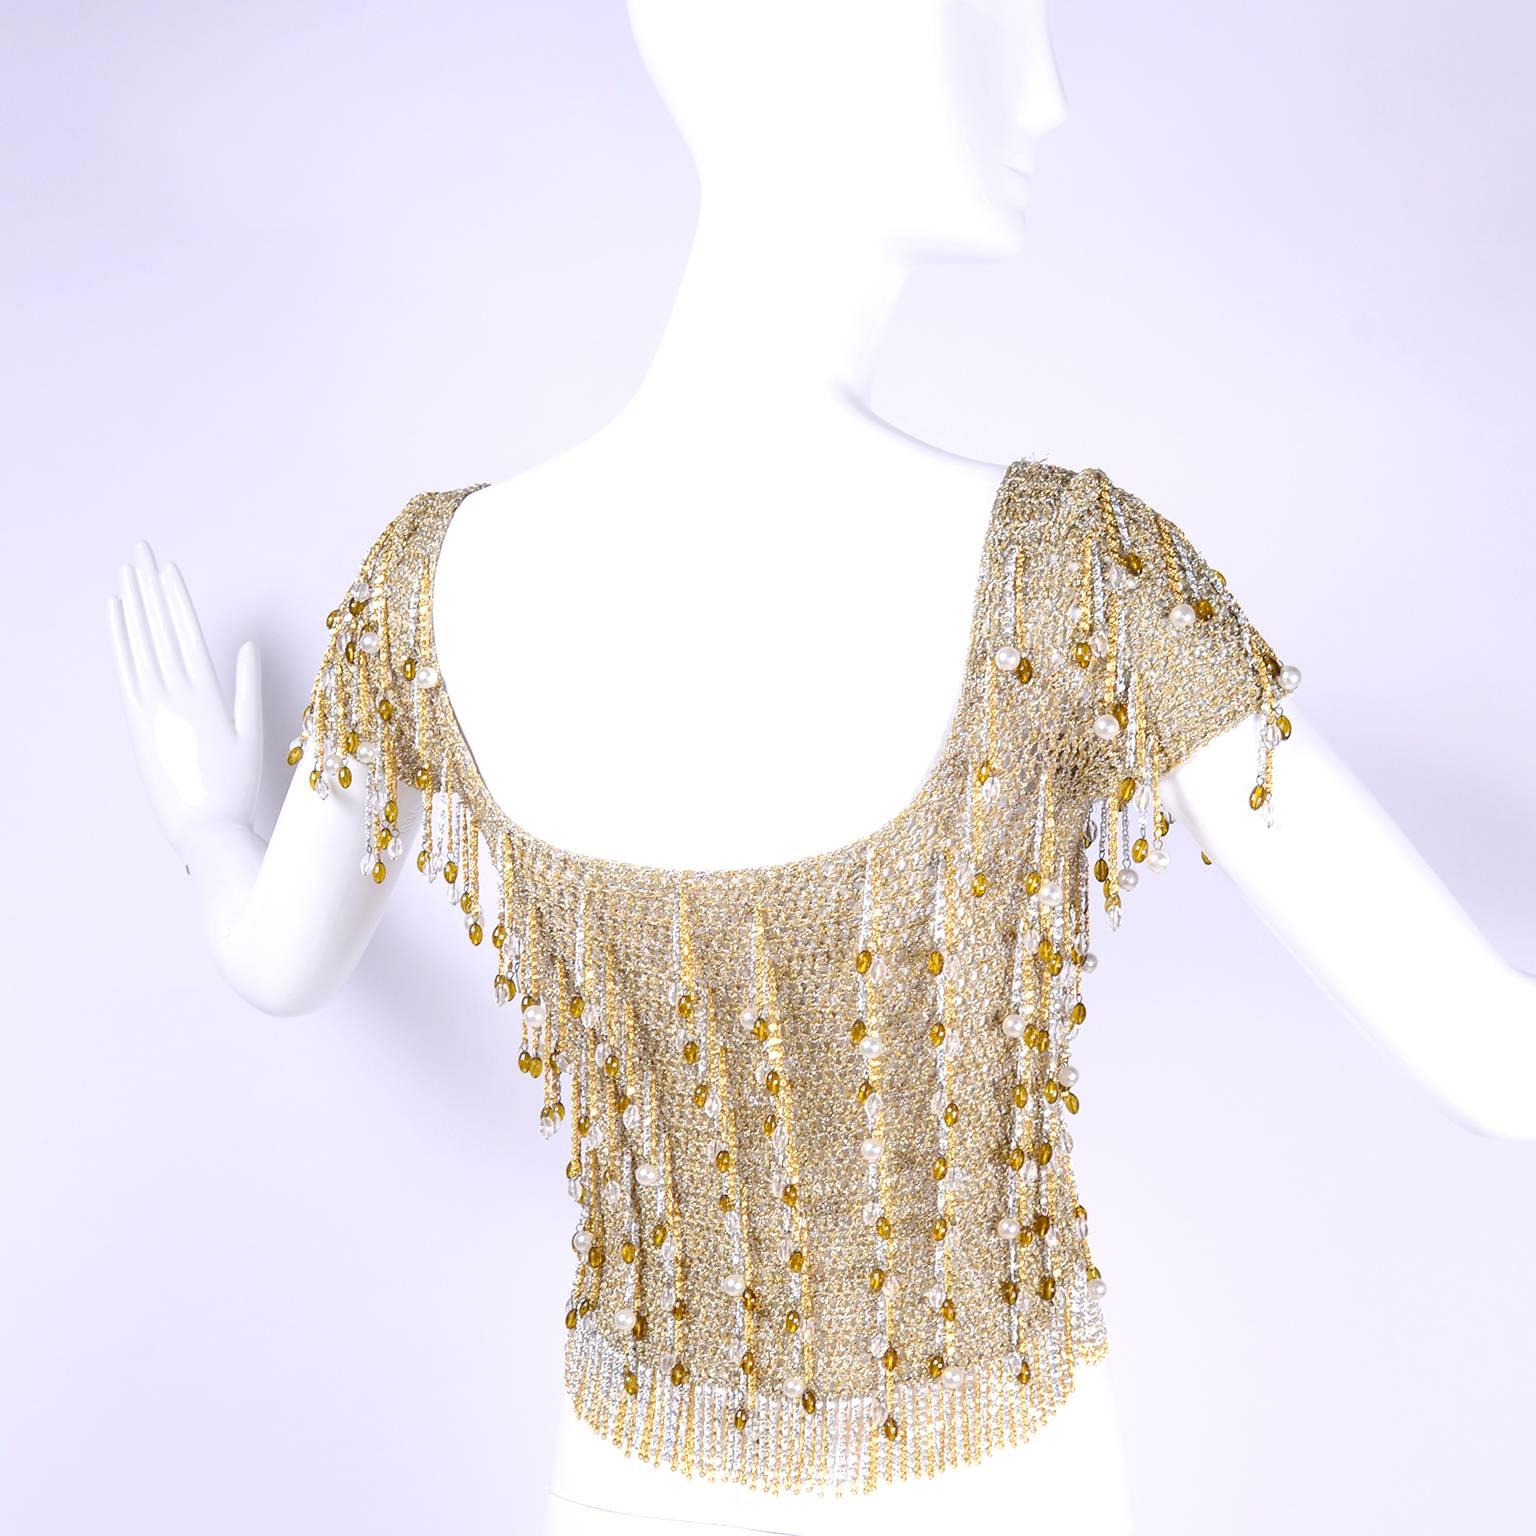 1970s Vintage Loris Azzaro Beaded Silver & Gold Metallic Crochet Top with Chains For Sale 2